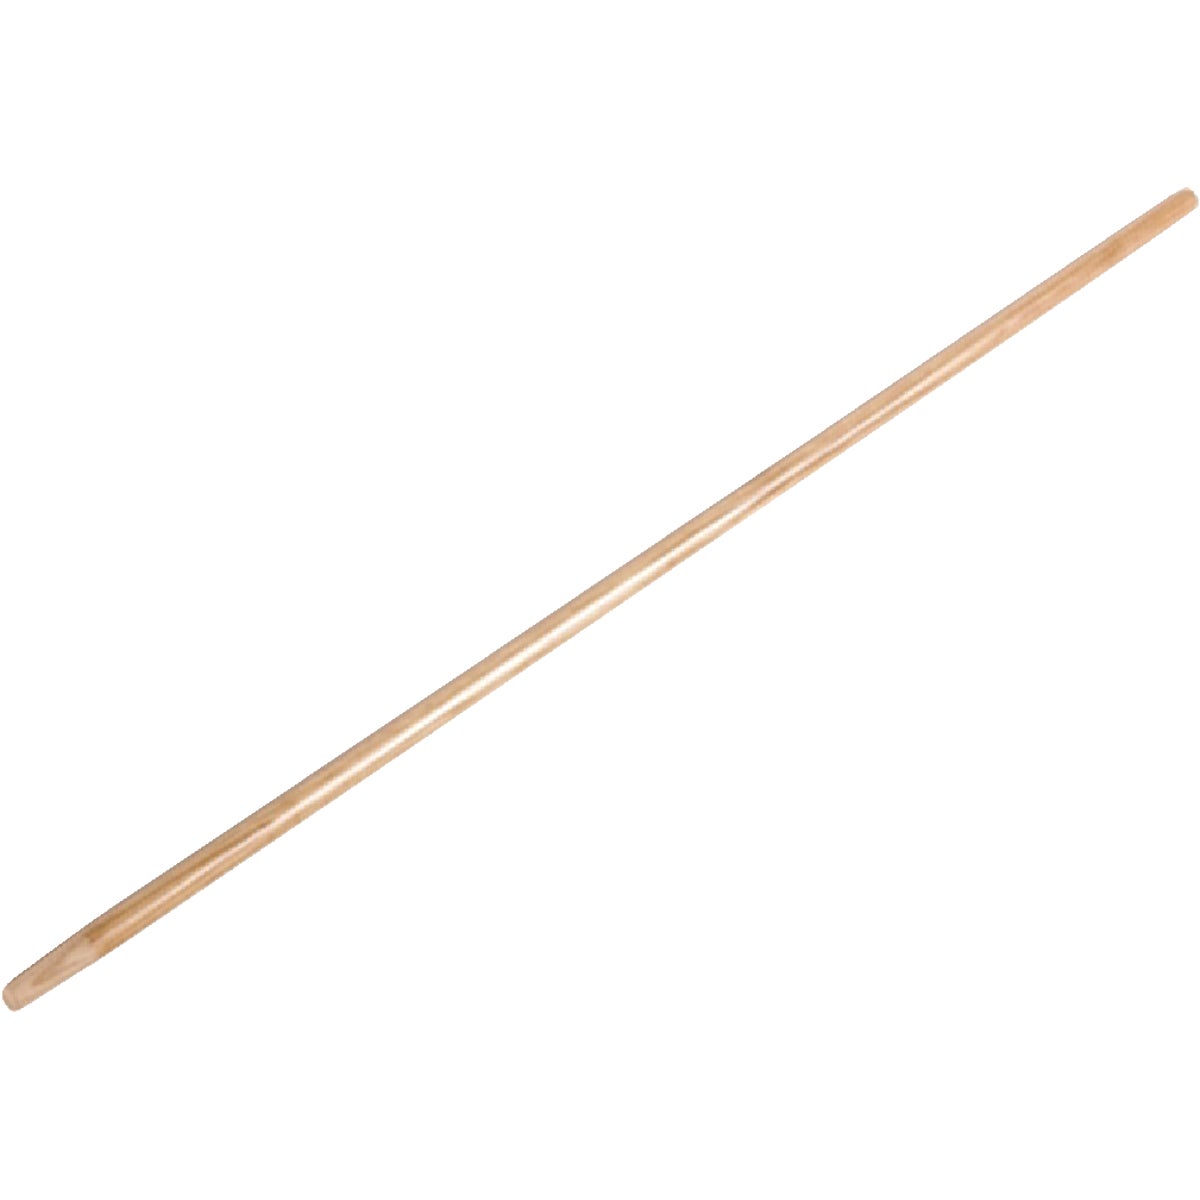 Item 633208, Lacquered and tapered wooden handle for floor squeegees